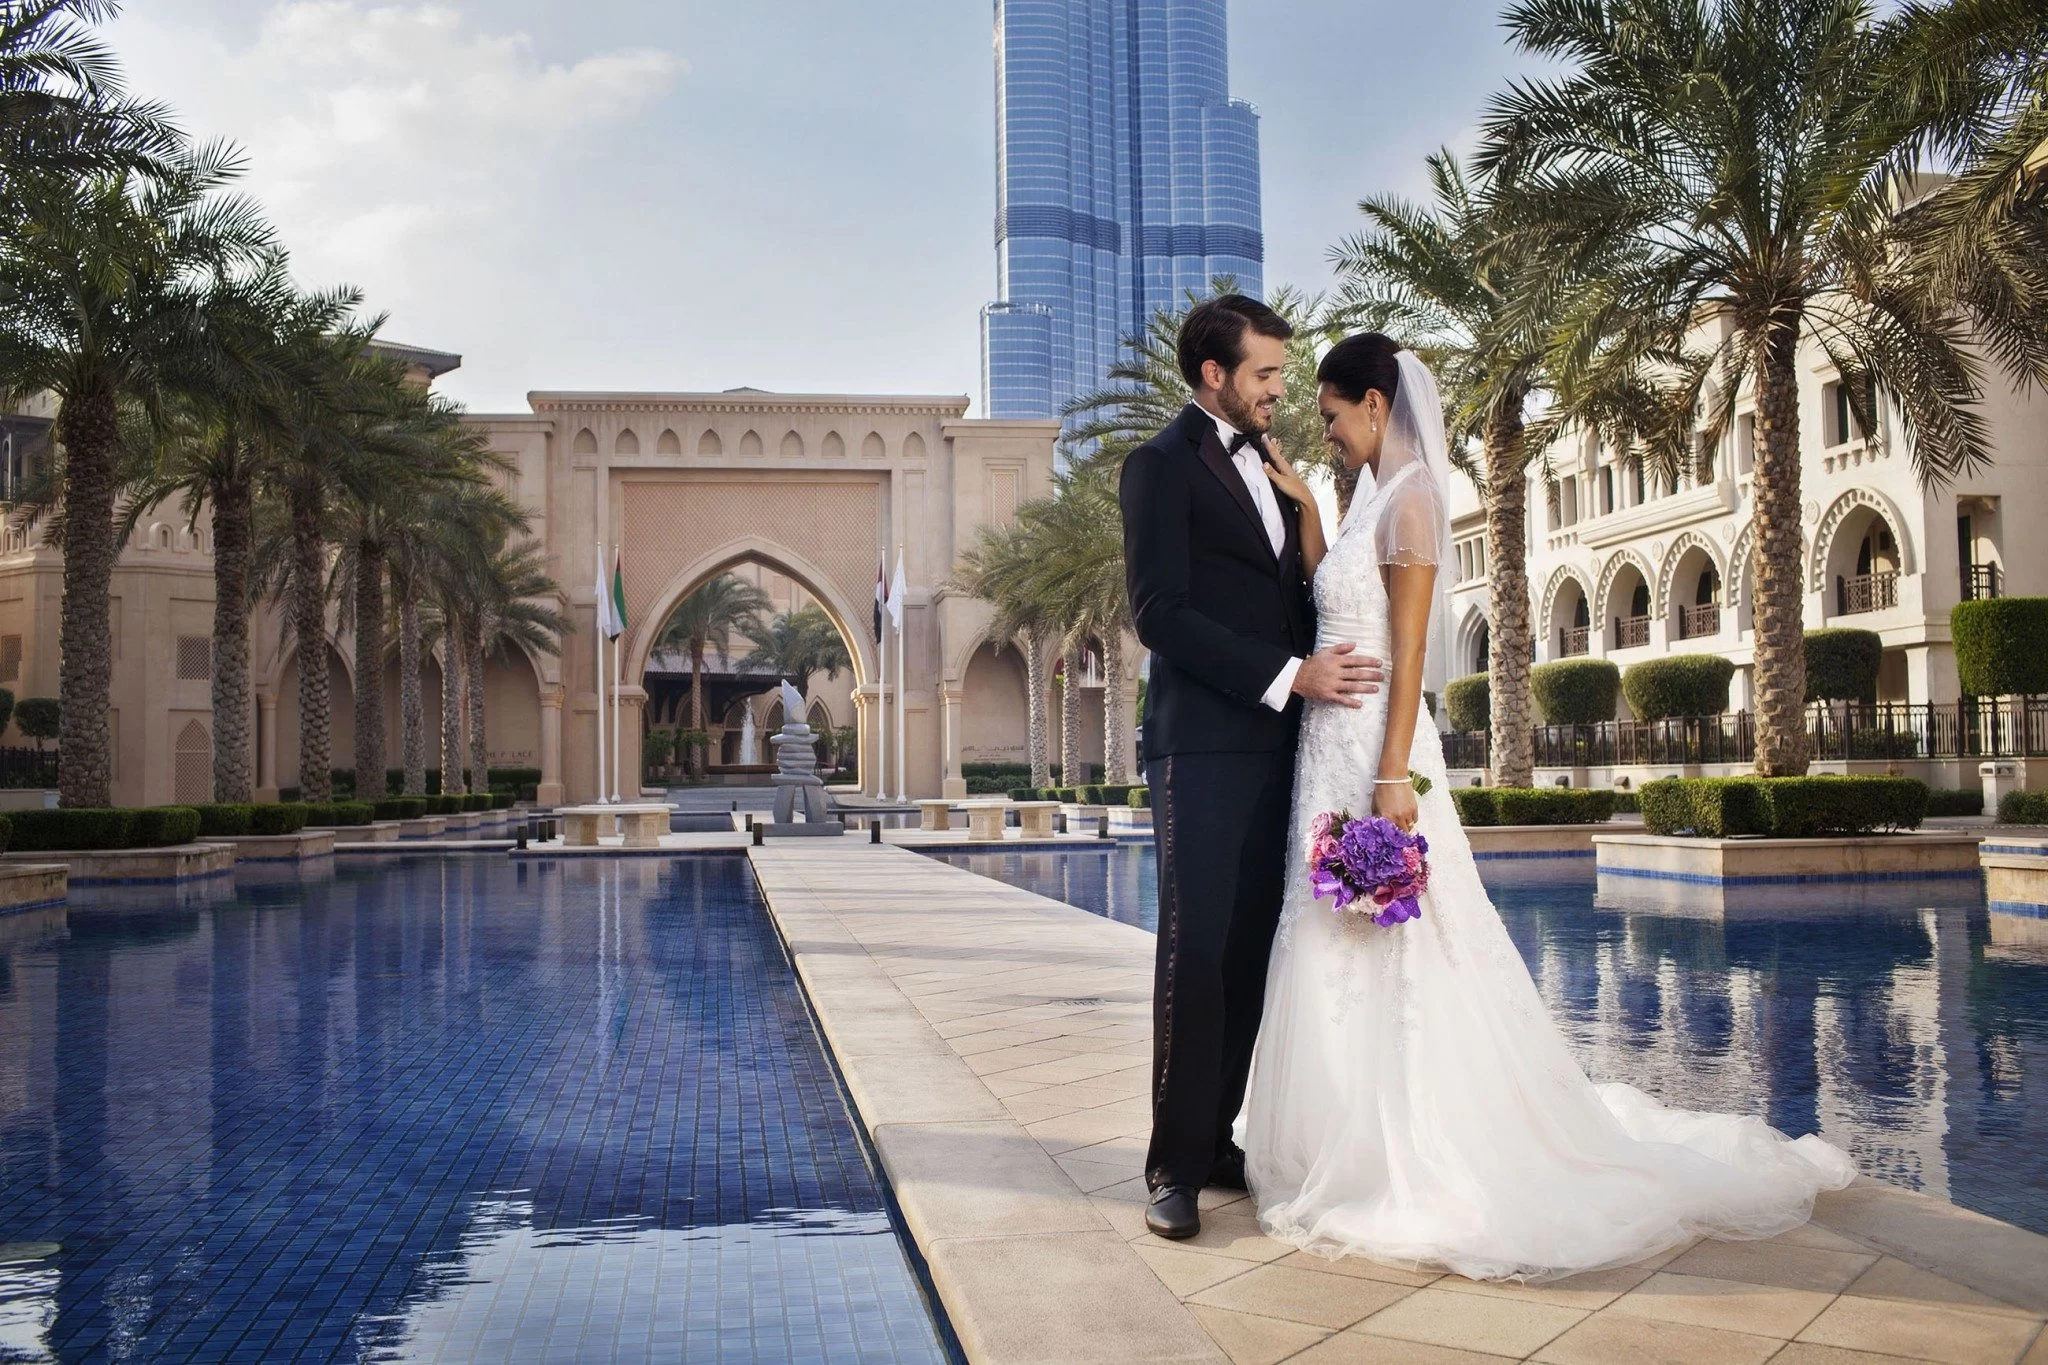 Why Should You Hold Your Wedding at Palace Downtown?